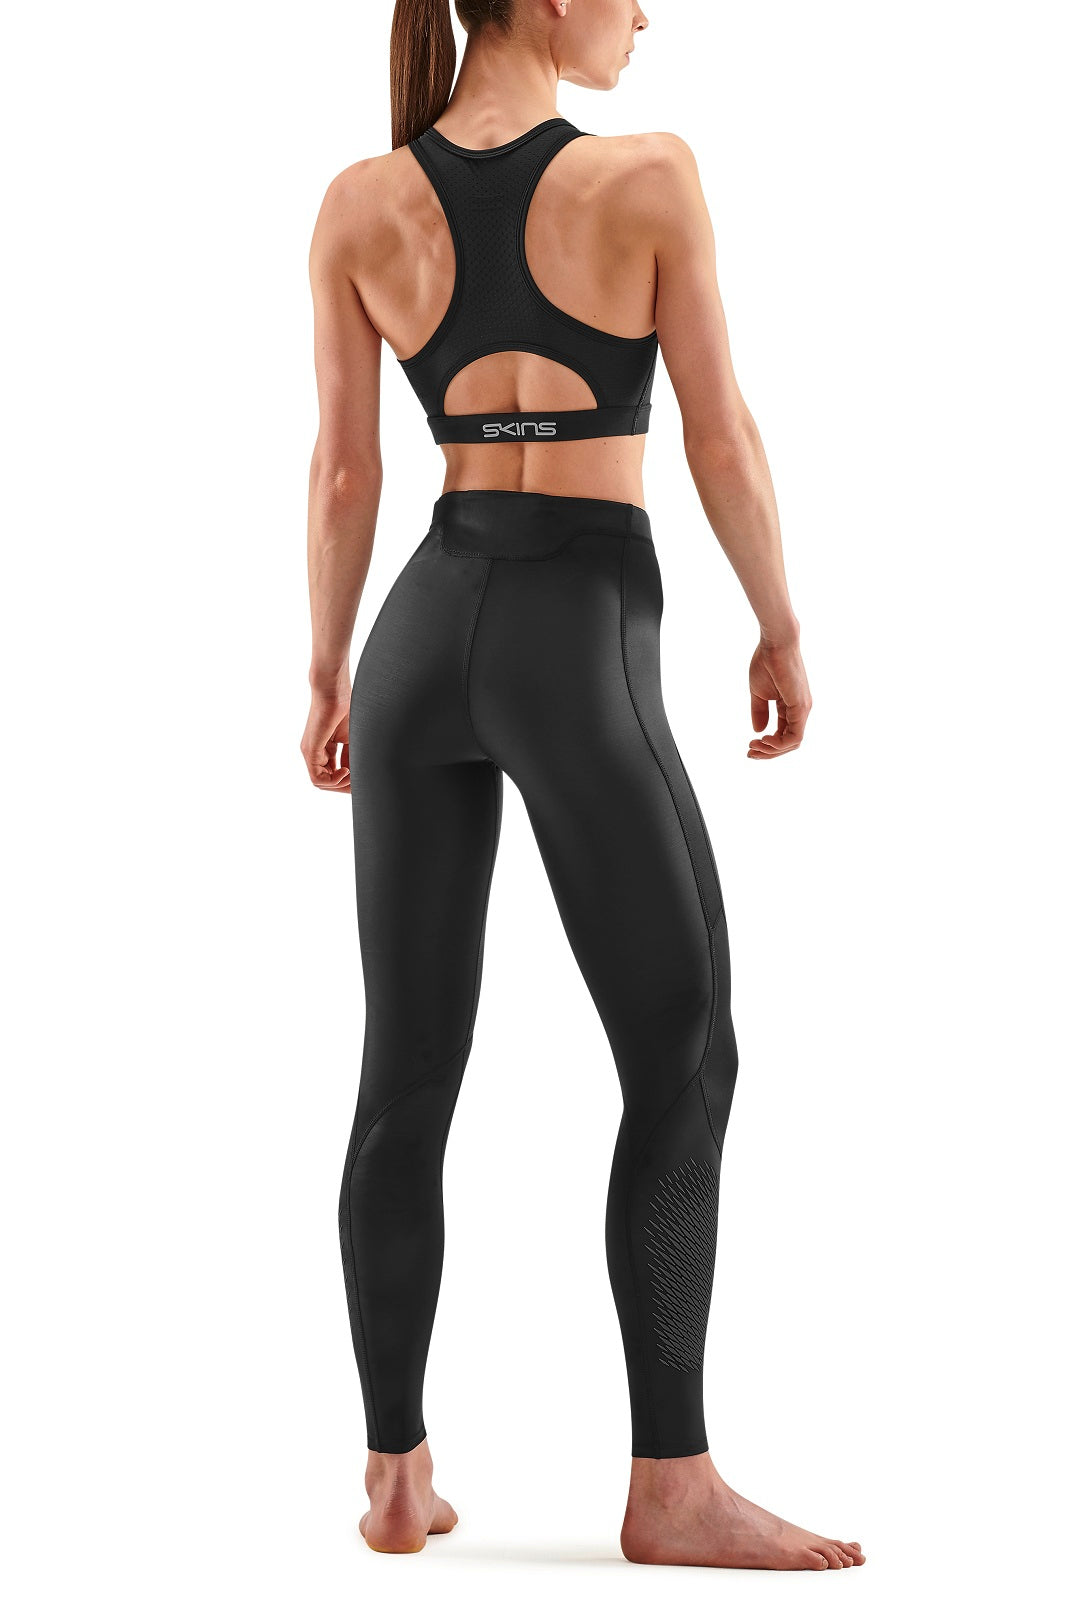 Skins Compression Long Tights, Women Series 3 Skyscraper - Black, 100%  Authentic, Women's Fashion, Activewear on Carousell